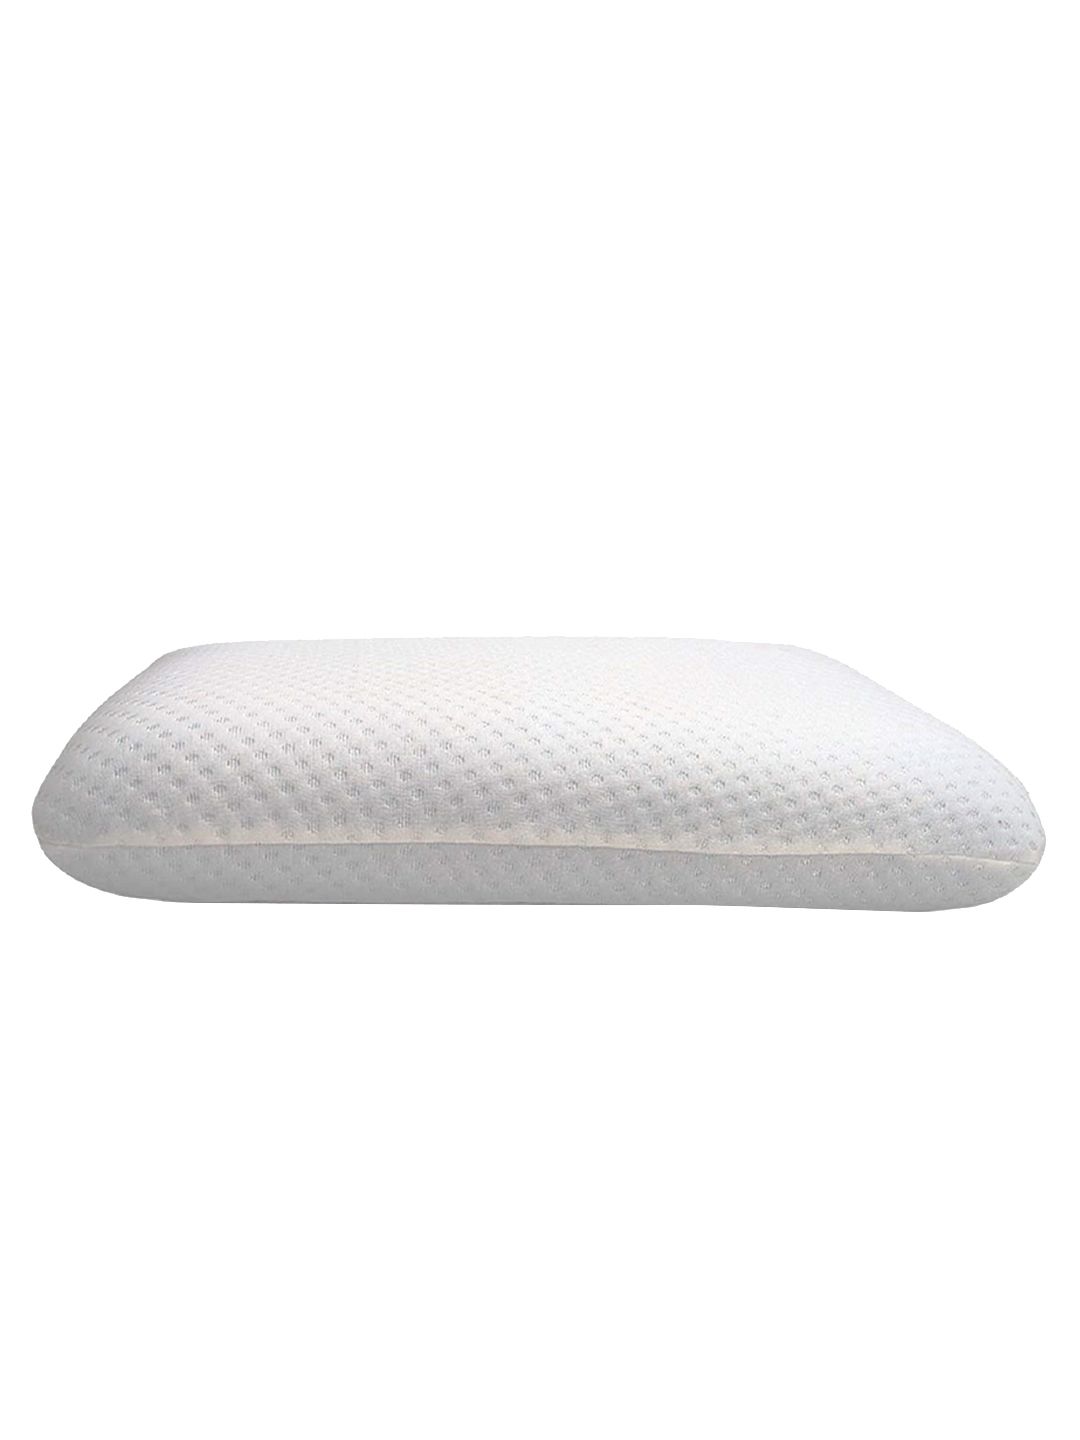 Pum Pum White Solid Memory Foam Bed Pillows Price in India